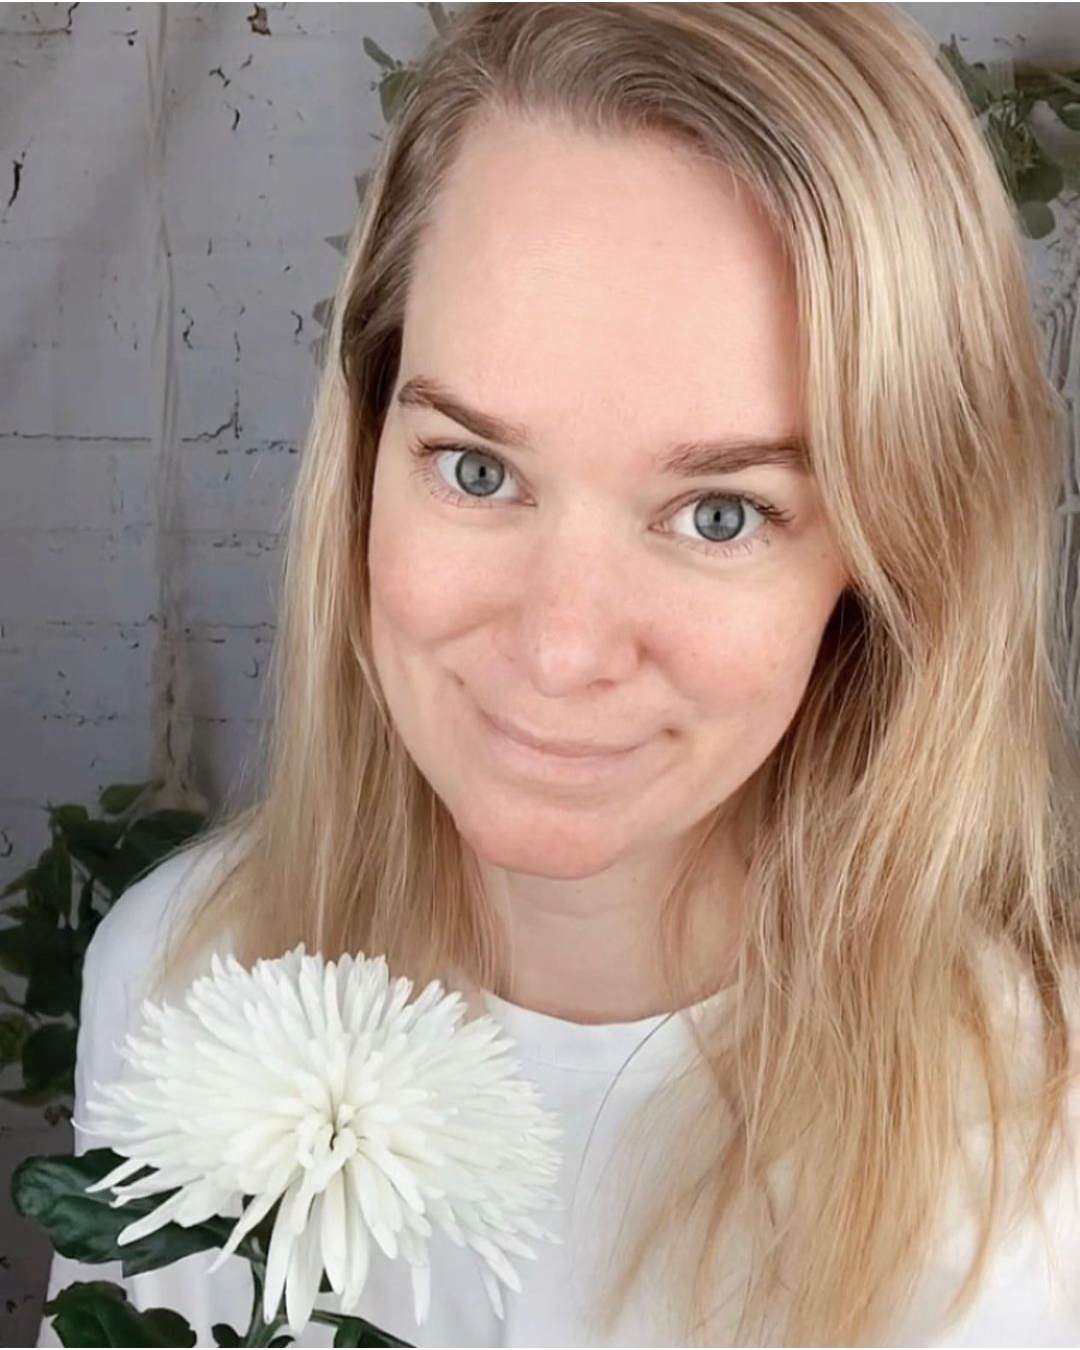 Sarah Zimmer in white T-Shirt and white flowers